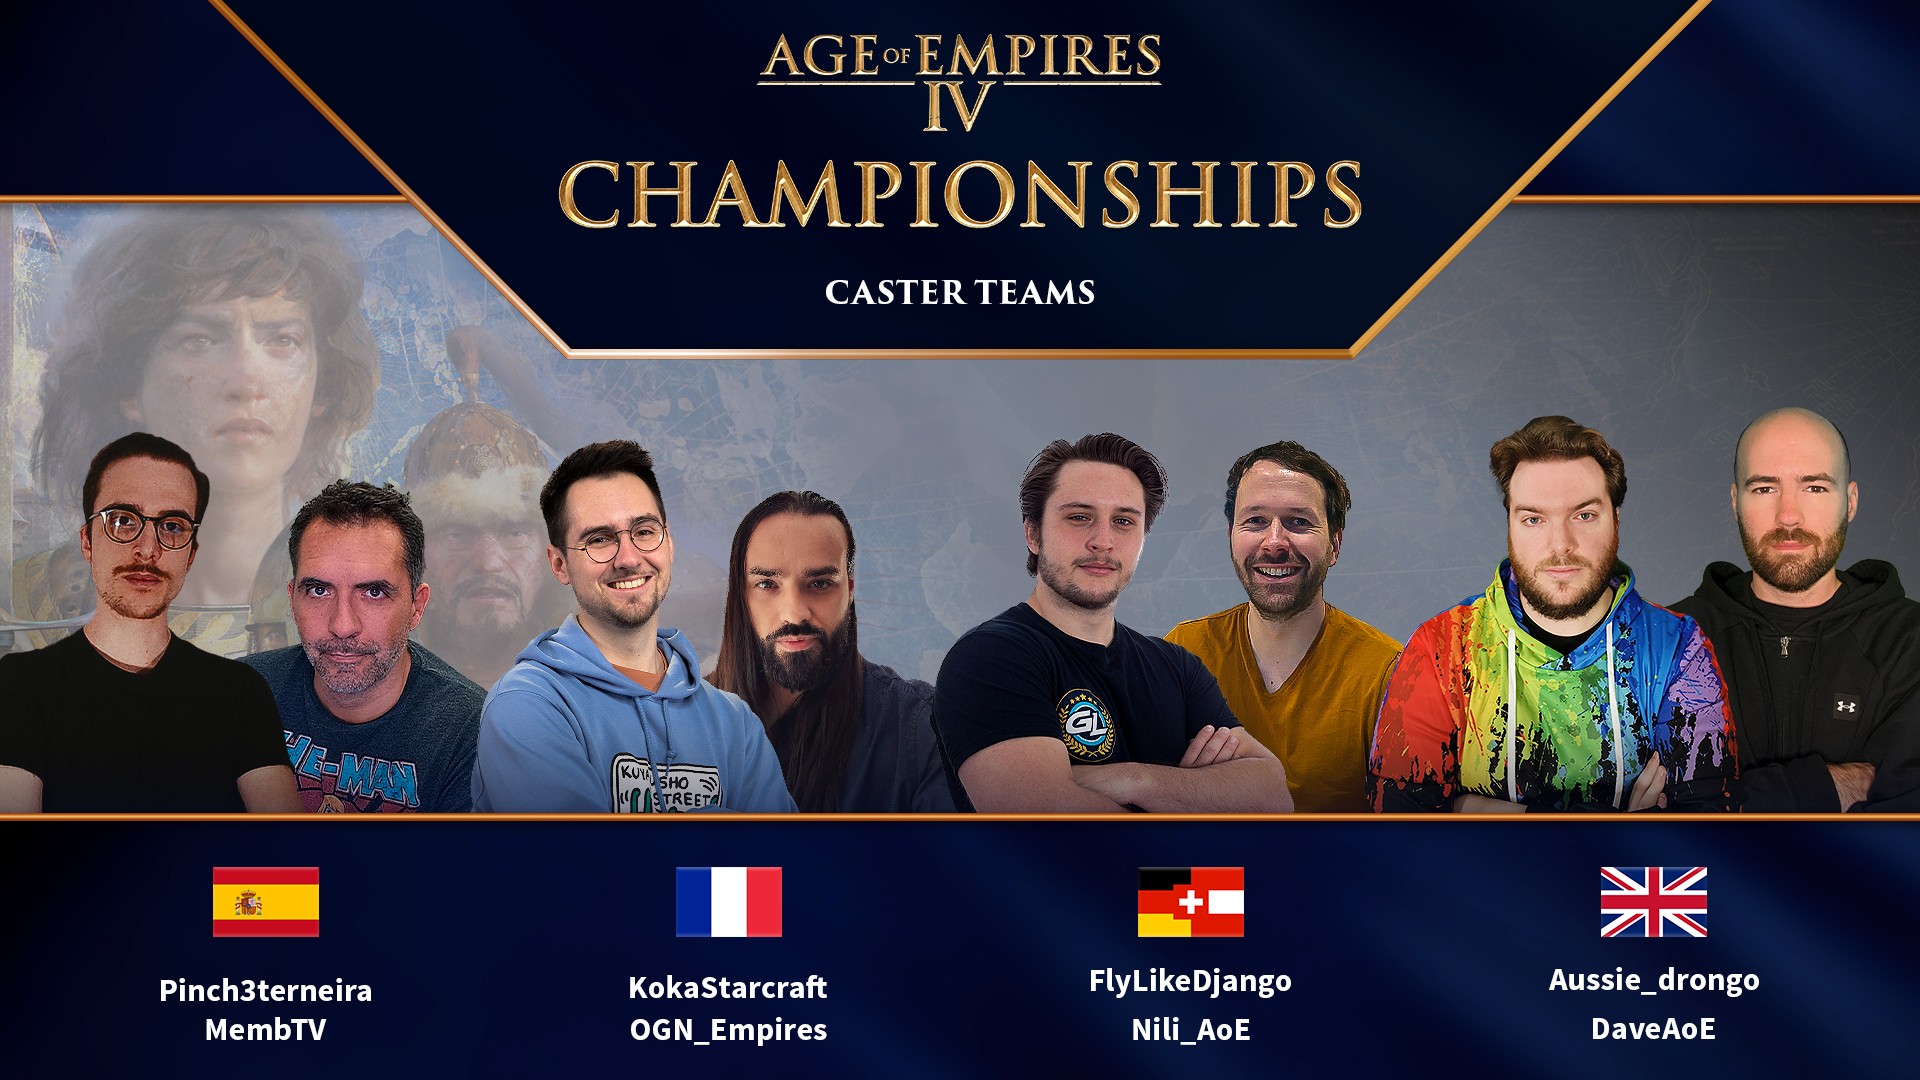 Age of Empires IV Caster